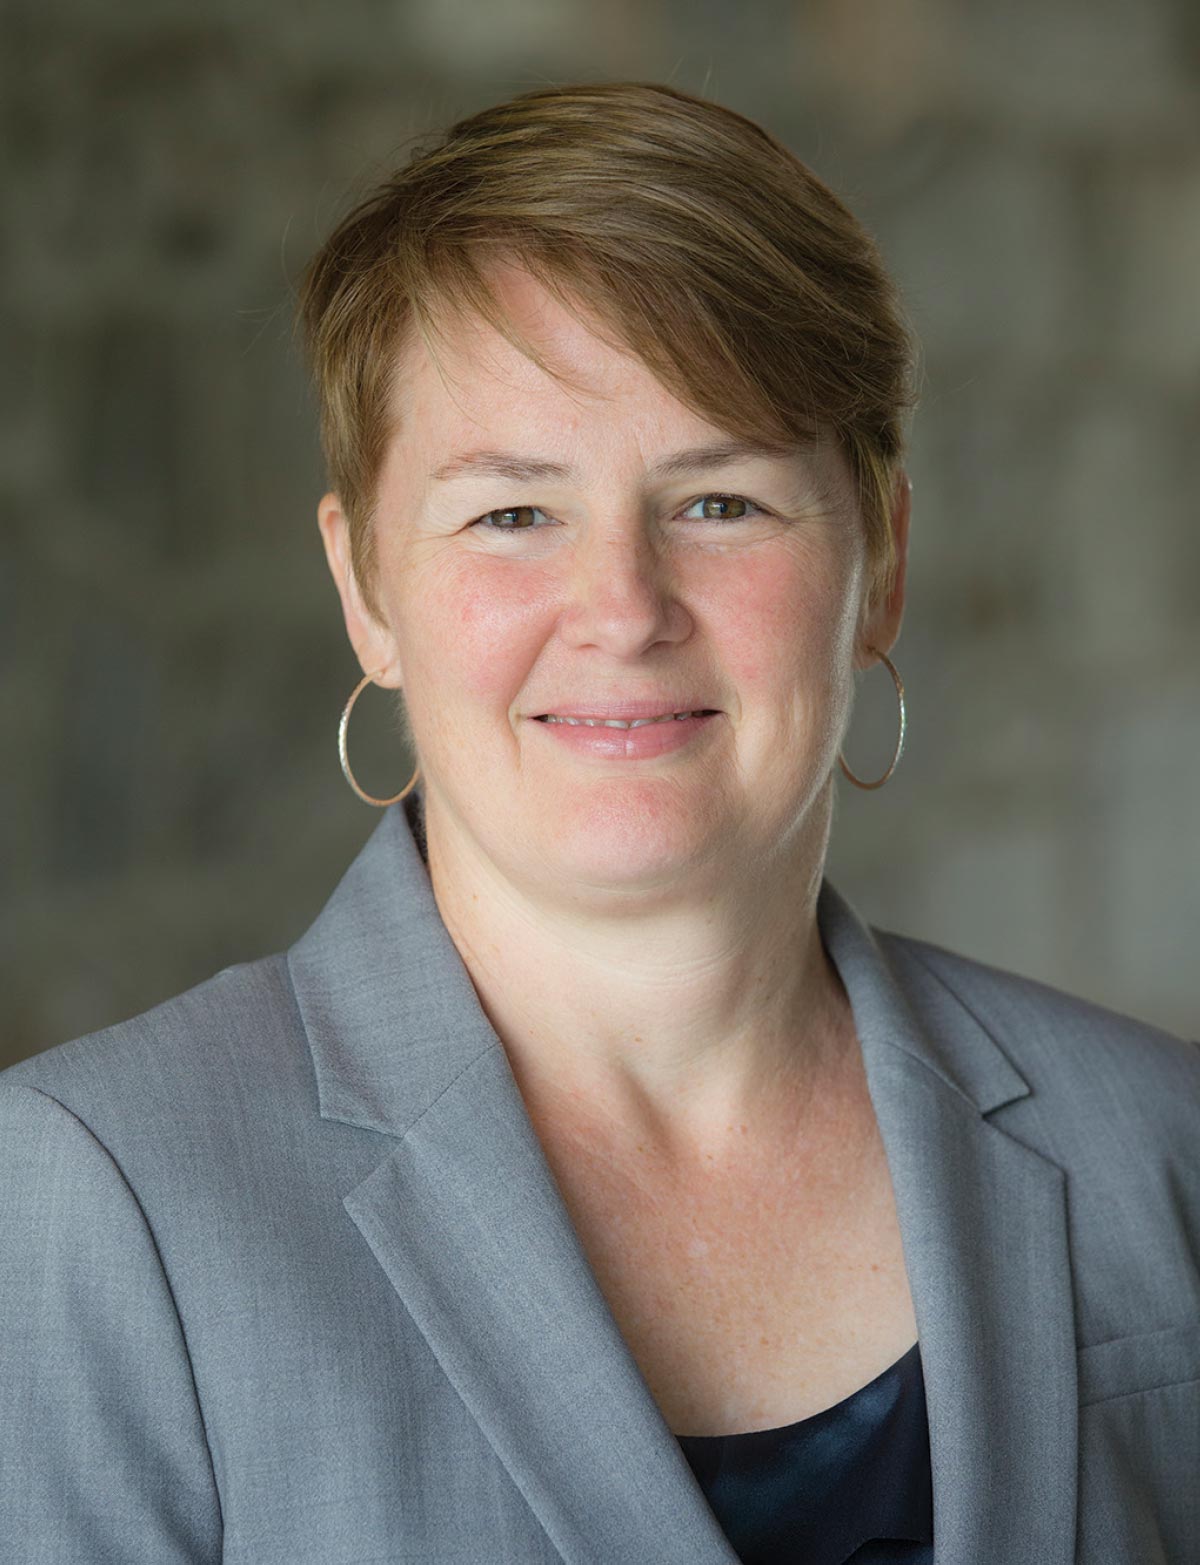 Headshot of Lisa Meeden wearing a gray suit. The background is browish-gray and out of focus.